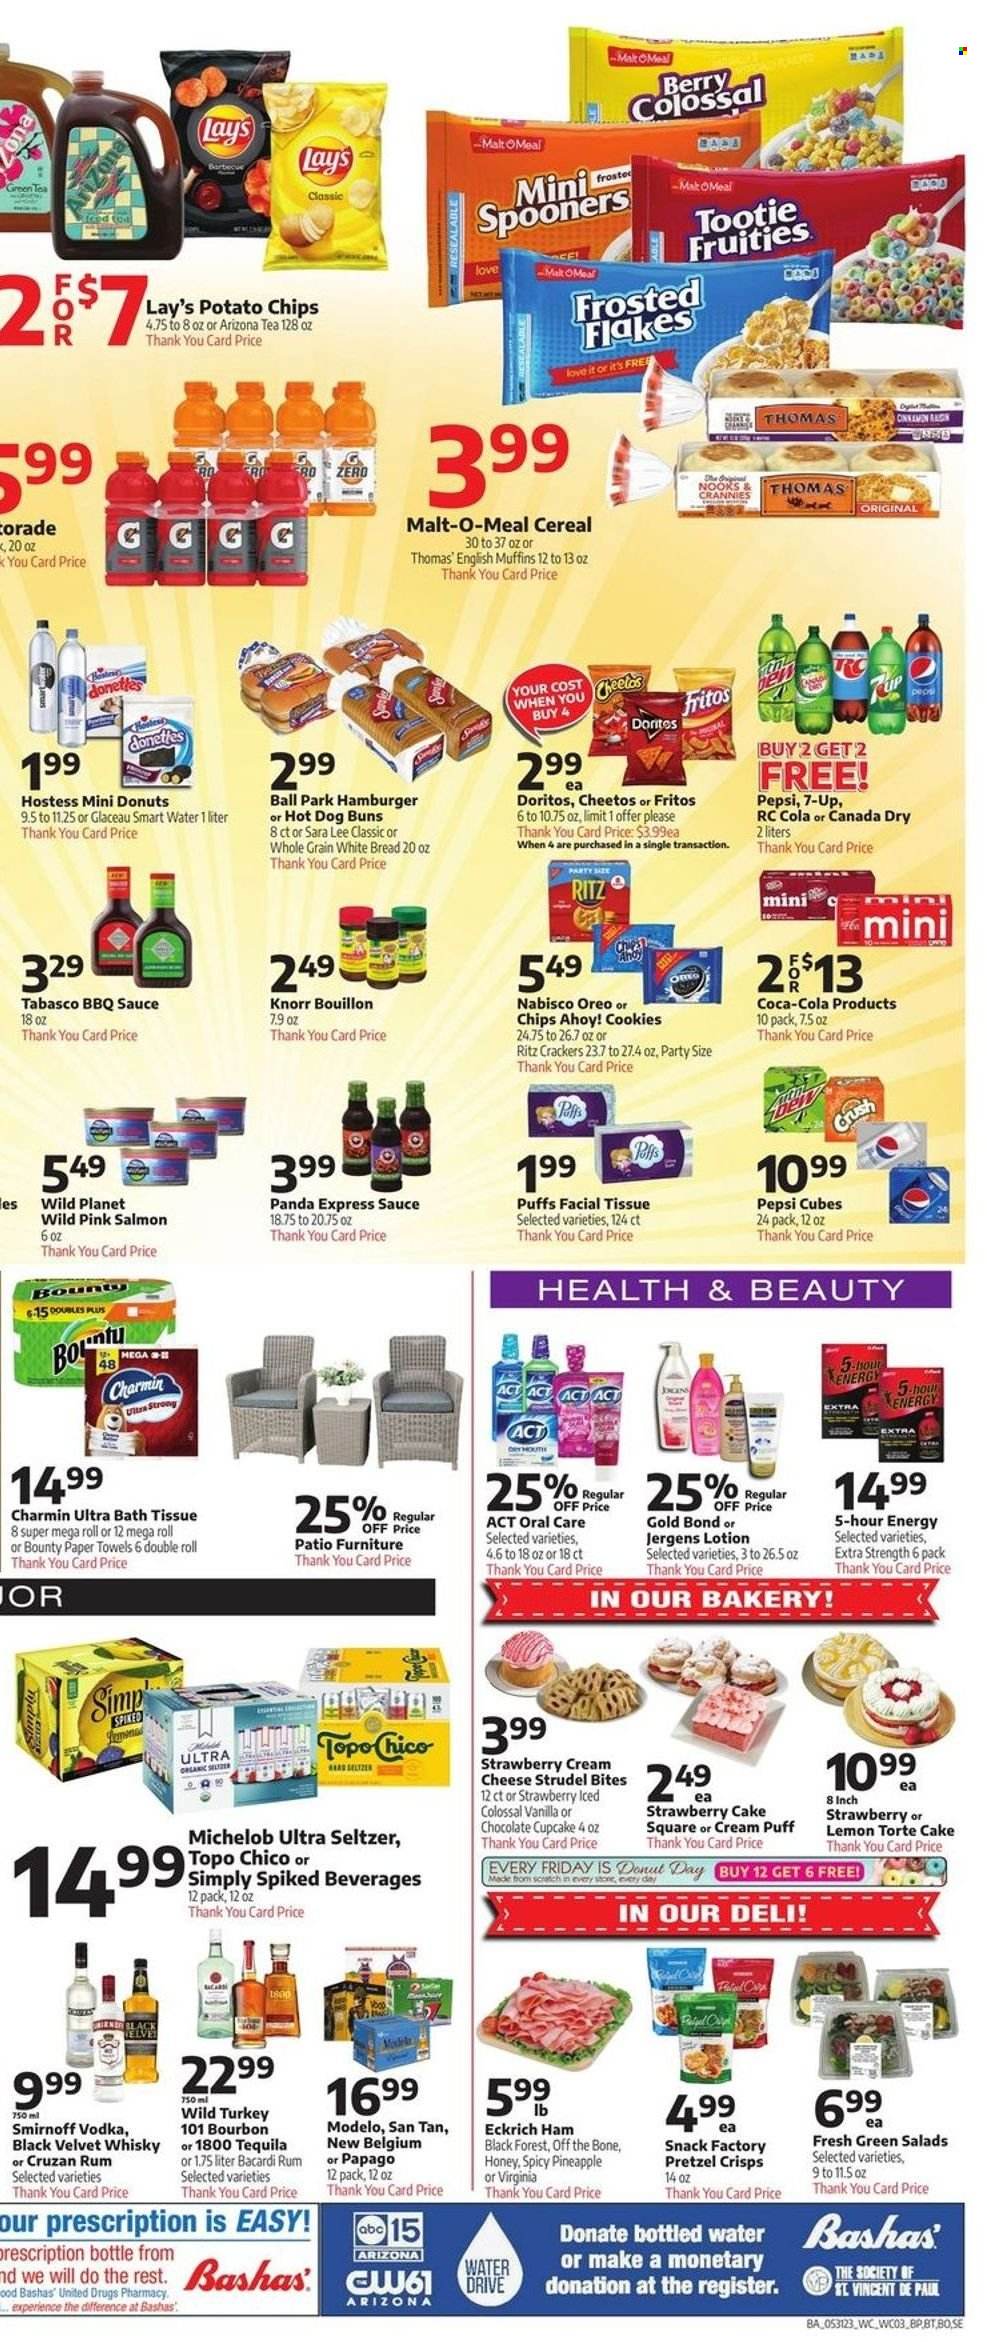 thumbnail - Bashas' Flyer - 05/31/2023 - 06/06/2023 - Sales products - bread, english muffins, white bread, cake, strudel, buns, Sara Lee, cupcake, puffs, donut, cream puffs, salmon, Knorr, sauce, ham, snack, cream cheese, Oreo, cookies, Bounty, crackers, Chips Ahoy!, RITZ, Nabisco, Doritos, Fritos, potato chips, Cheetos, Lay’s, pretzel crisps, salty snack, bouillon, tabasco, malt, cereals, Frosted Flakes, cinnamon, BBQ sauce, honey, Canada Dry, Coca-Cola, lemonade, Pepsi, soft drink, 7UP, AriZona, seltzer water, bottled water, Smartwater, water, tea, Bacardi, rum, Smirnoff, tequila, vodka, whisky, Modelo, Topo Chico, turkey, bath tissue, kitchen towels, paper towels, Charmin, body lotion, Jergens, Michelob. Page 3.